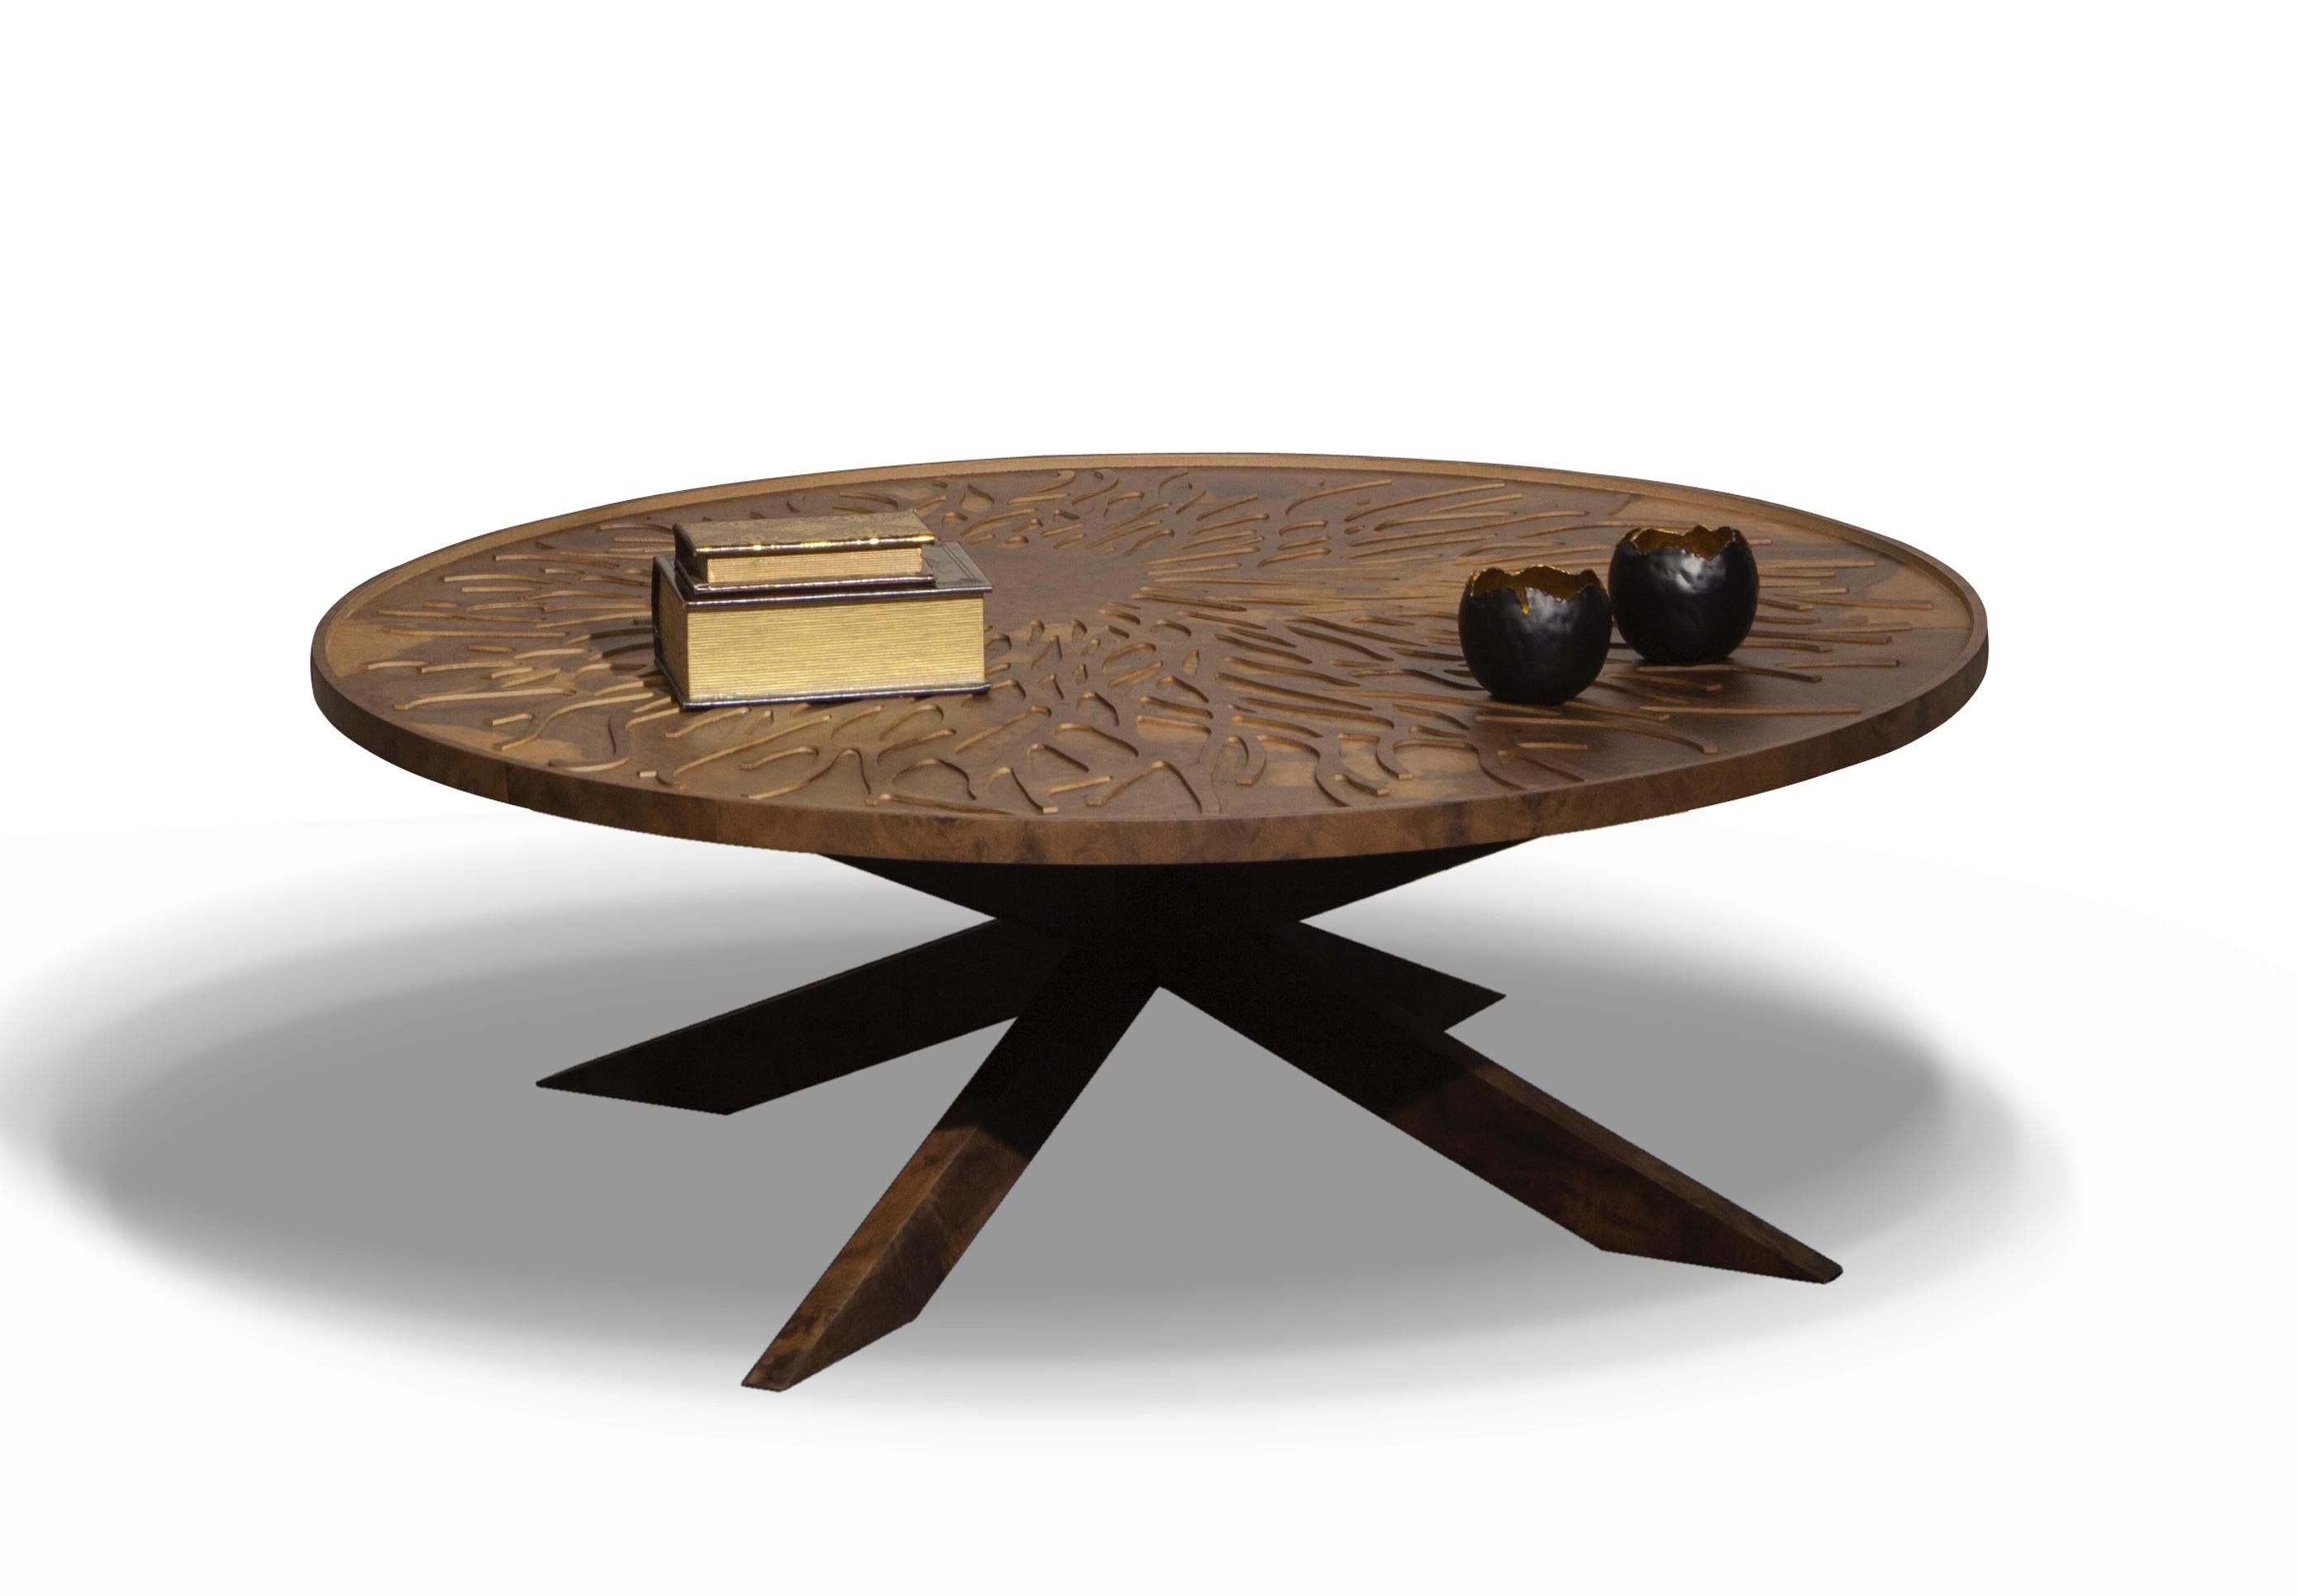 Solid wood intricately engraved with Sisli’s signature branches makes this coffee table an artful addition to the center of any seating area.